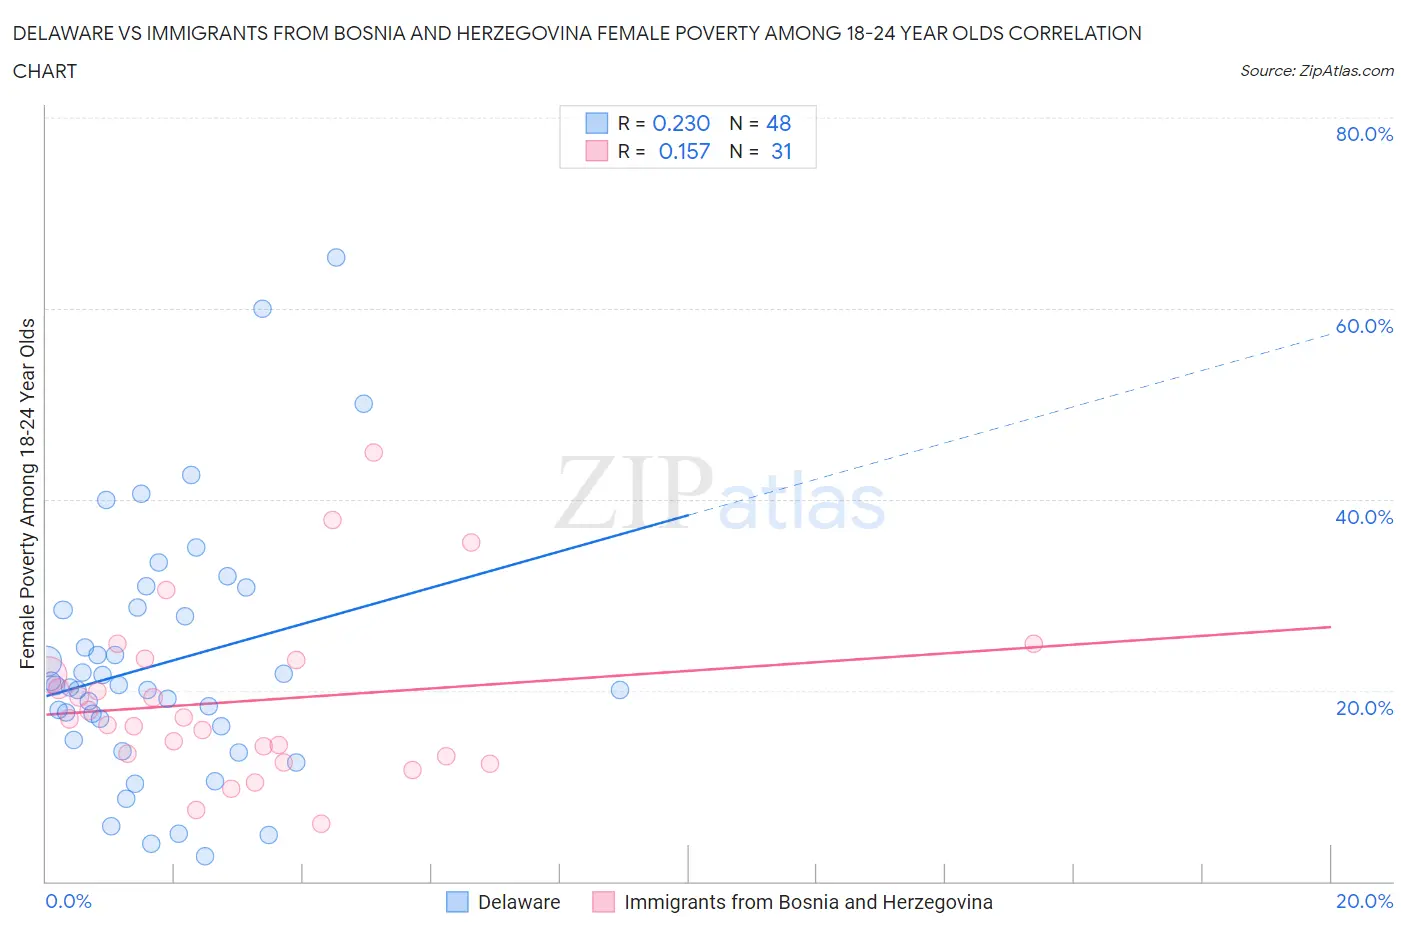 Delaware vs Immigrants from Bosnia and Herzegovina Female Poverty Among 18-24 Year Olds